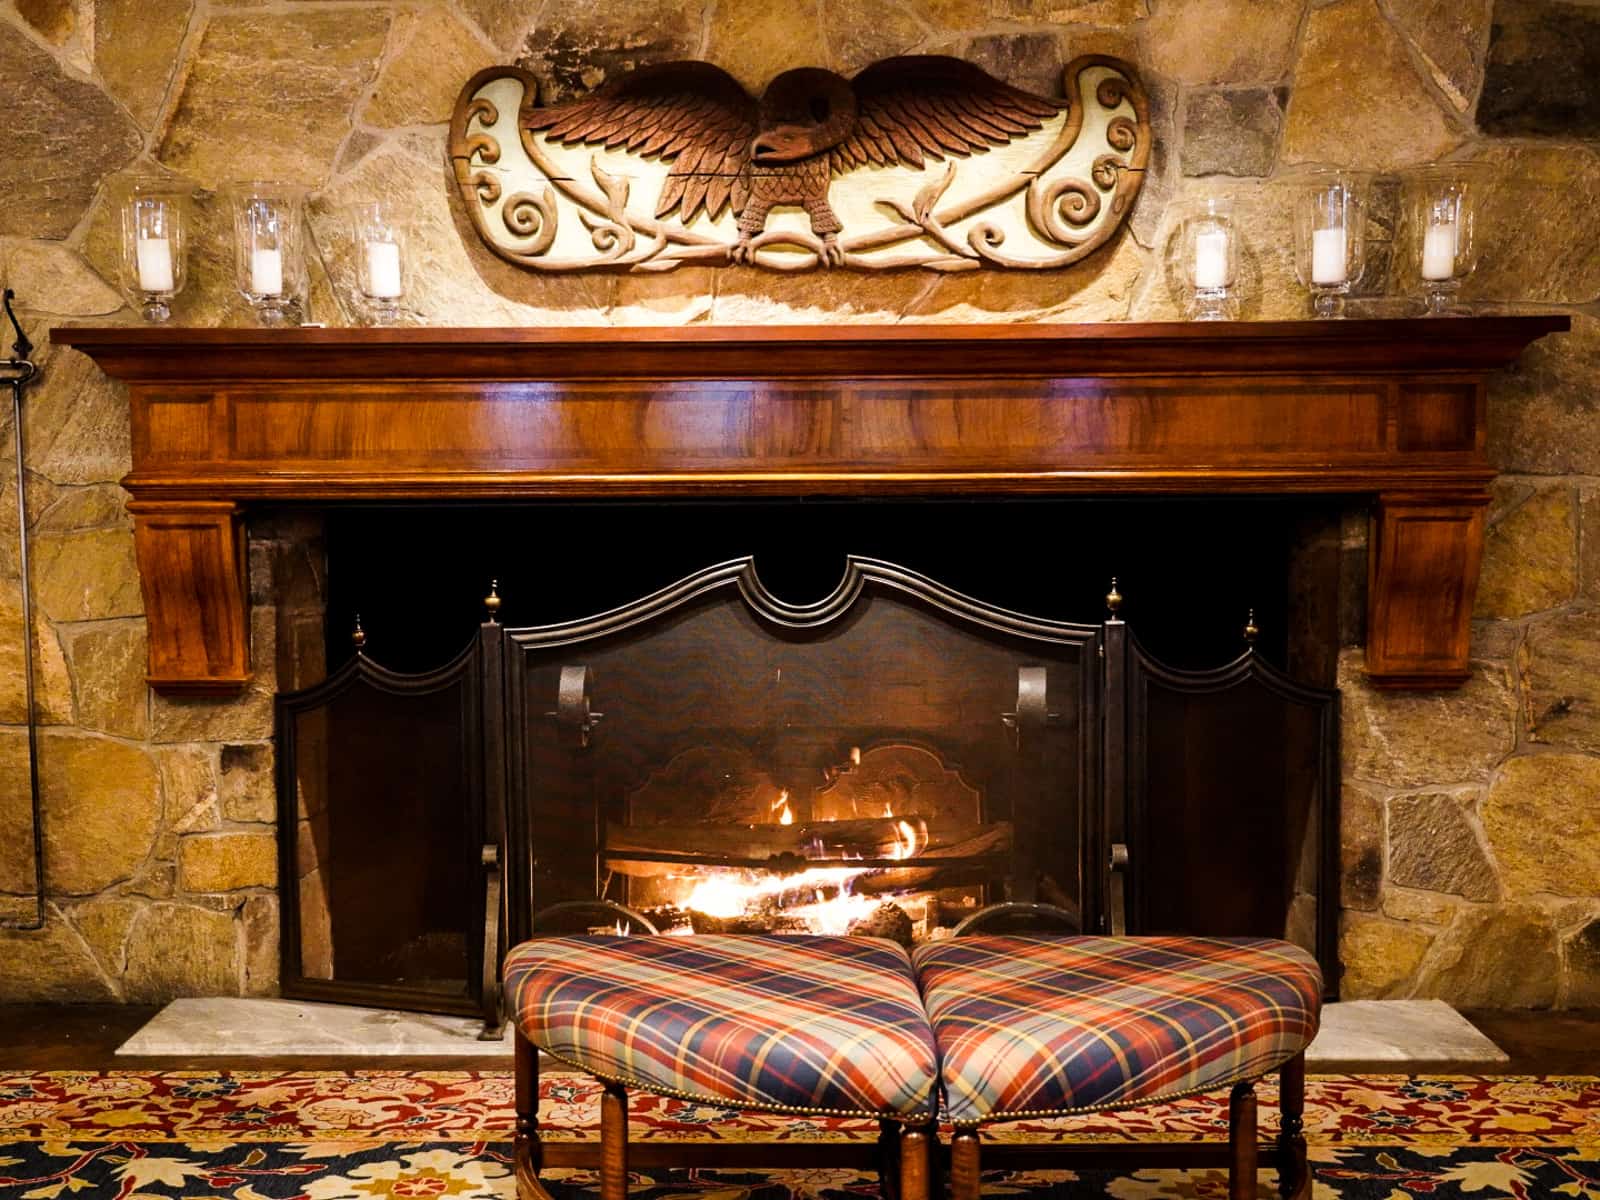 Fireplace at the Woodstock Inn